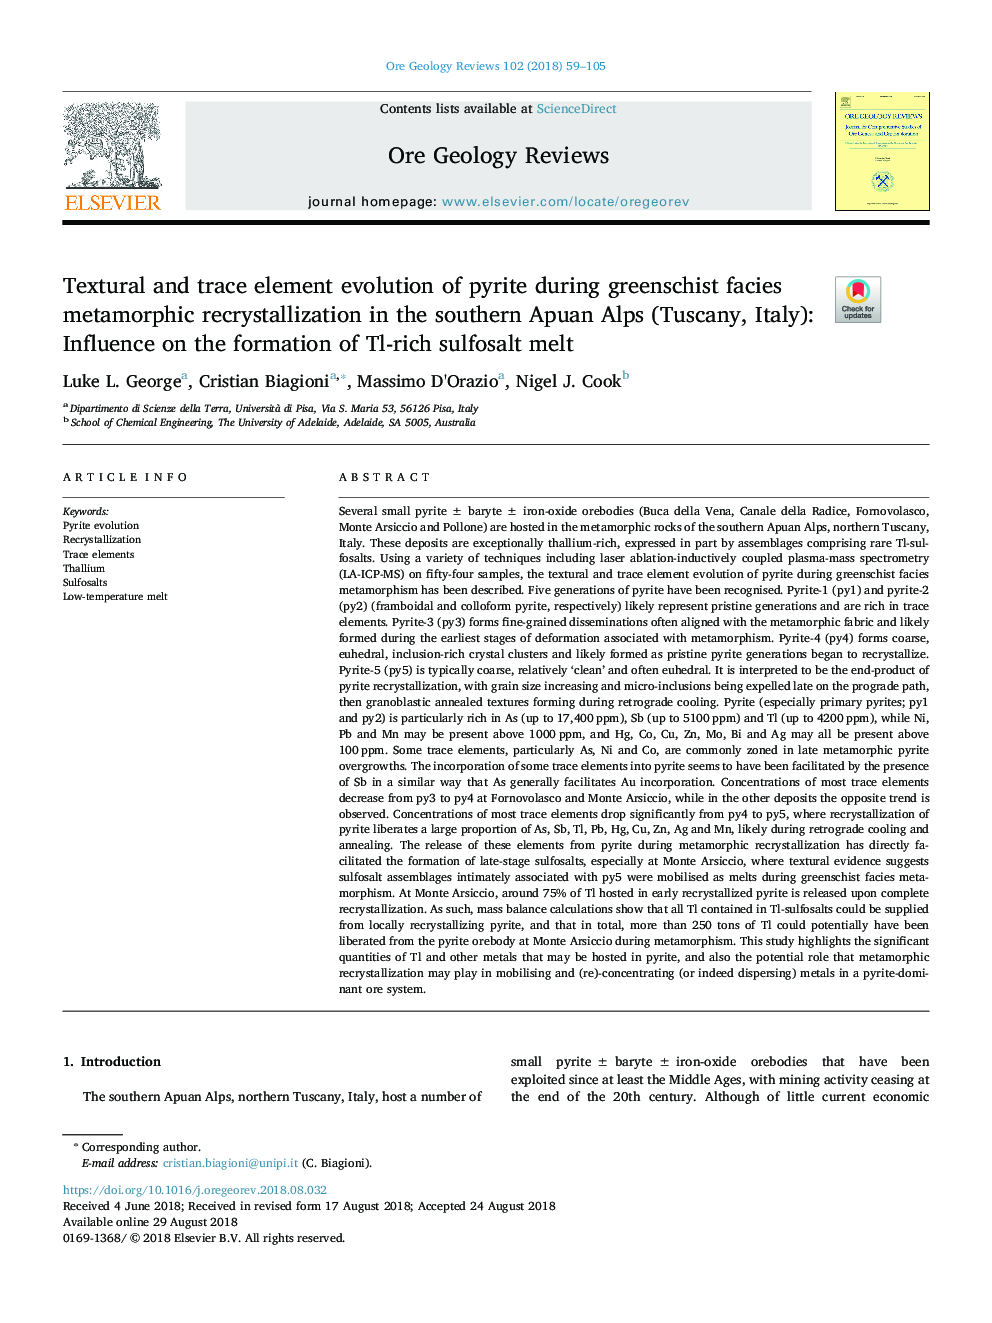 Textural and trace element evolution of pyrite during greenschist facies metamorphic recrystallization in the southern Apuan Alps (Tuscany, Italy): Influence on the formation of Tl-rich sulfosalt melt